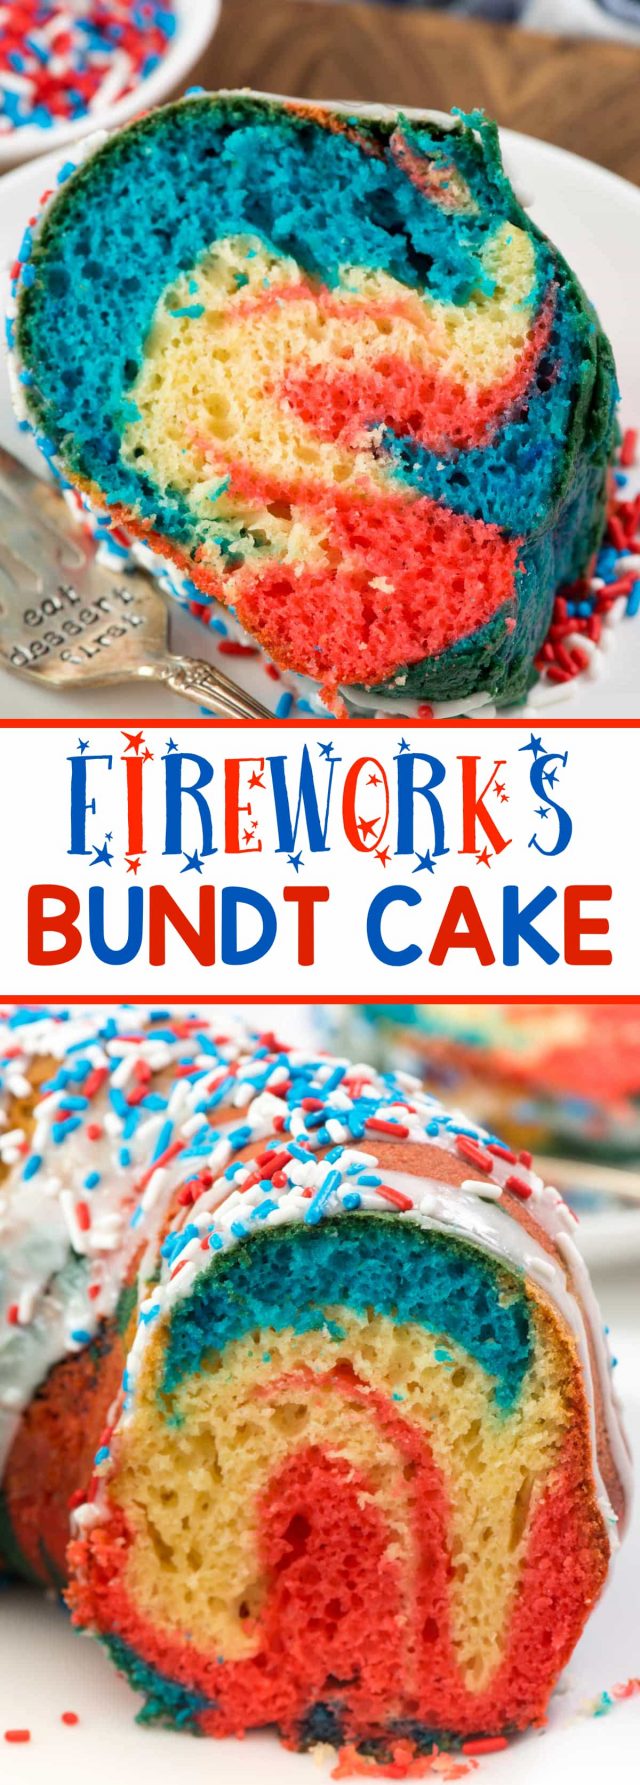 Fireworks Bundt Cake - this easy bundt cake recipe starts with a cake mix. Doctor it up to make a soft and delicious bundt cake that is accidentally dairy free. Tie dye it for the 4th of July!